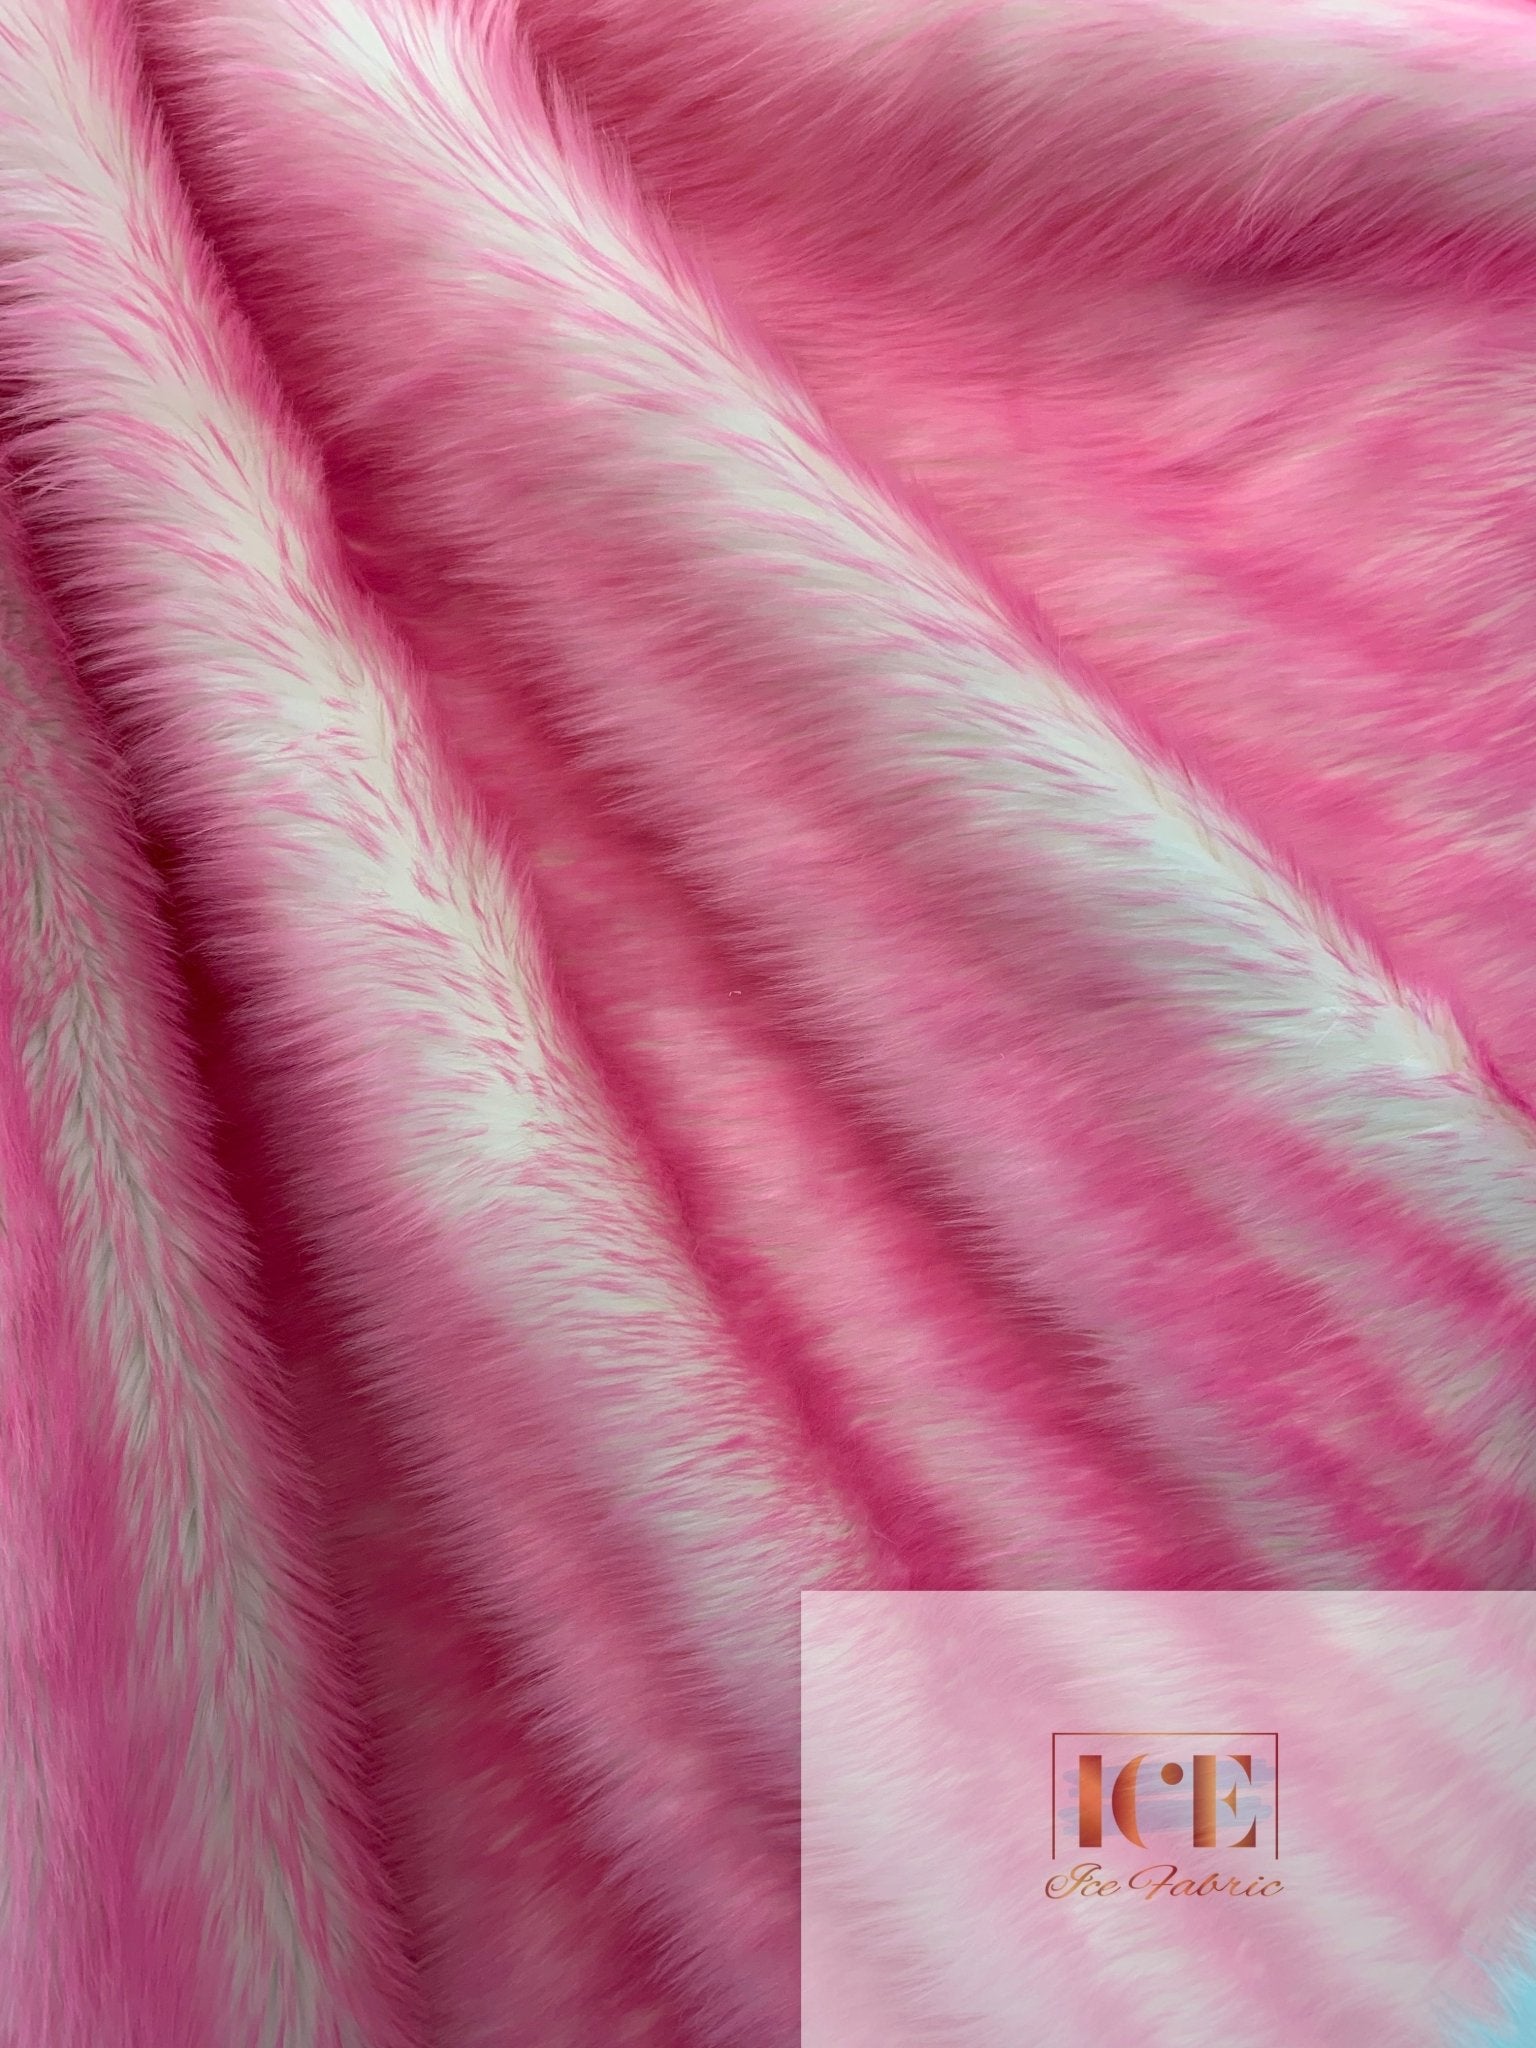 Canadian Fox 2 Tone Shaggy Long Pile Faux Fur Fabric For Blankets, Costumes, Bed SpreadICEFABRICICE FABRICSCandy PinkBy The Yard (60 inches Wide)Canadian Fox 2 Tone Shaggy Long Pile Faux Fur Fabric For Blankets, Costumes, Bed Spread ICEFABRIC Candy Pink